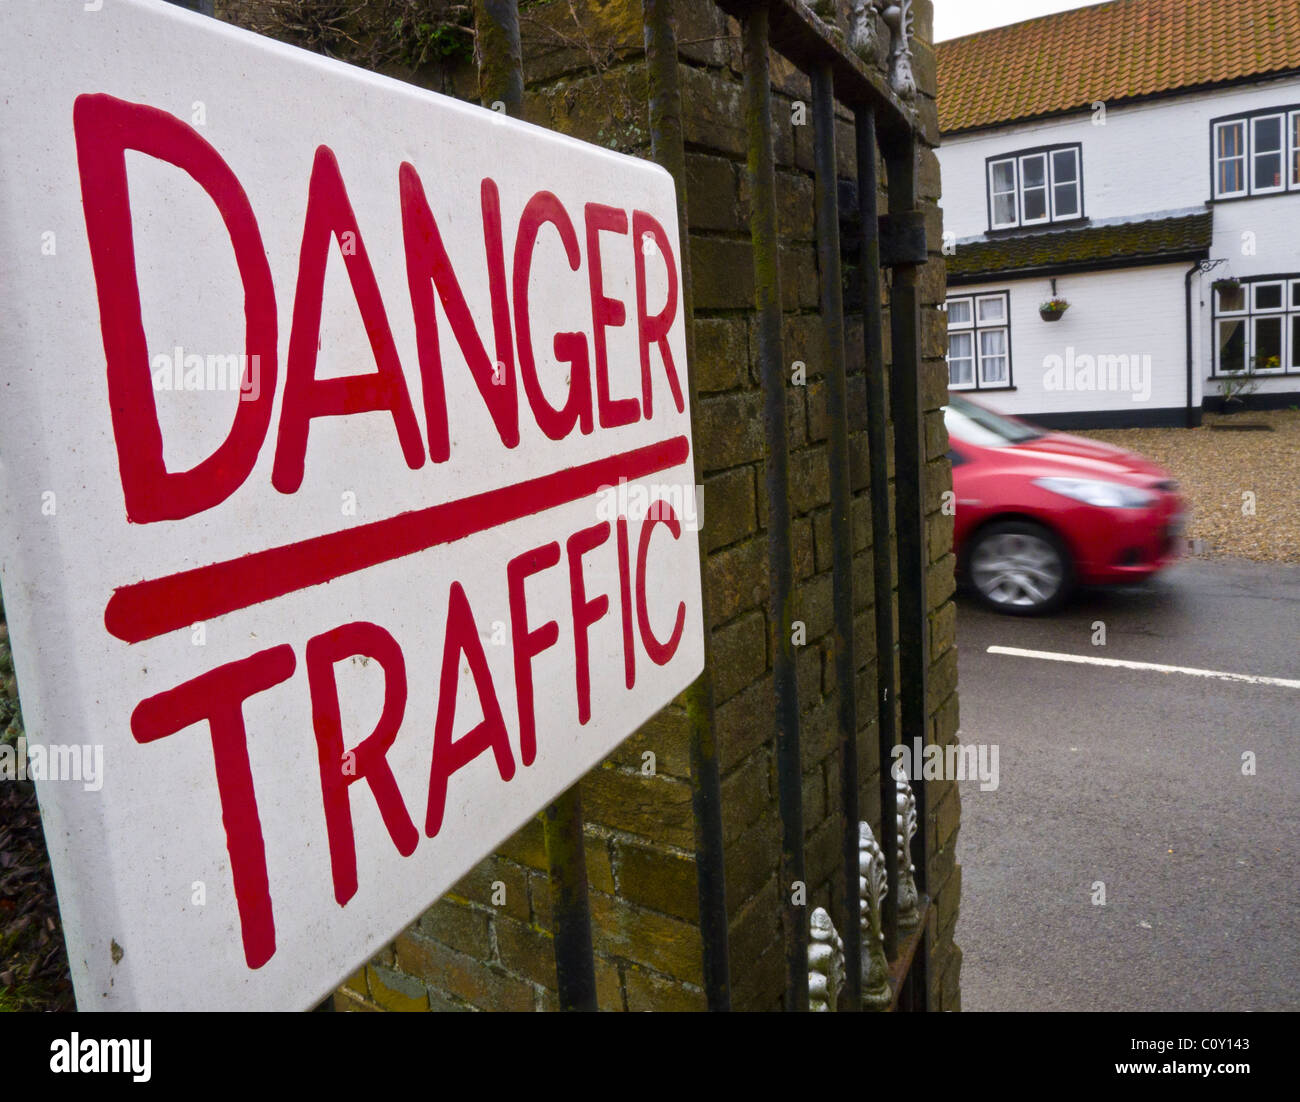 A warning sign reading 'DANGER TRAFFIC'  with a moving car on the road behind Stock Photo